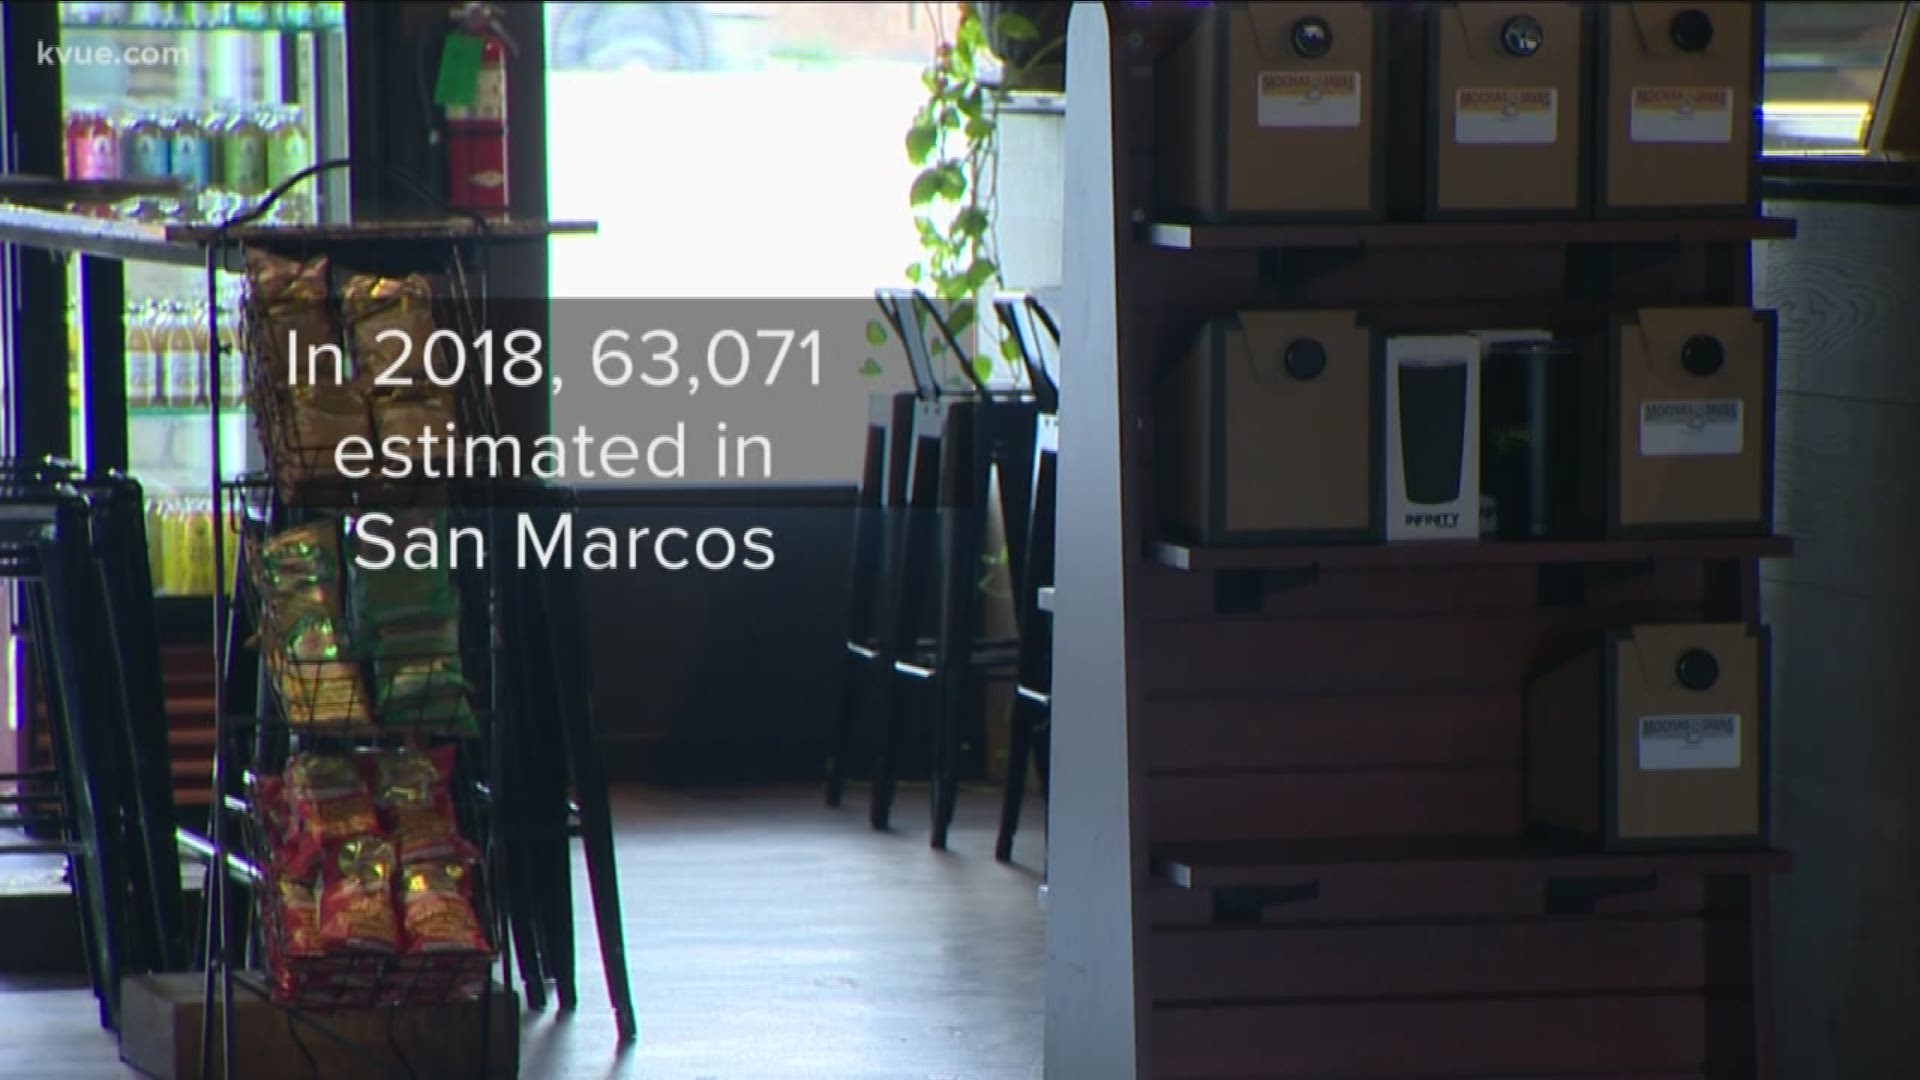 KVUE's Hank Cavagnaro tells us how the growth in San Marcos isn't just from high enrollment at Texas State university.